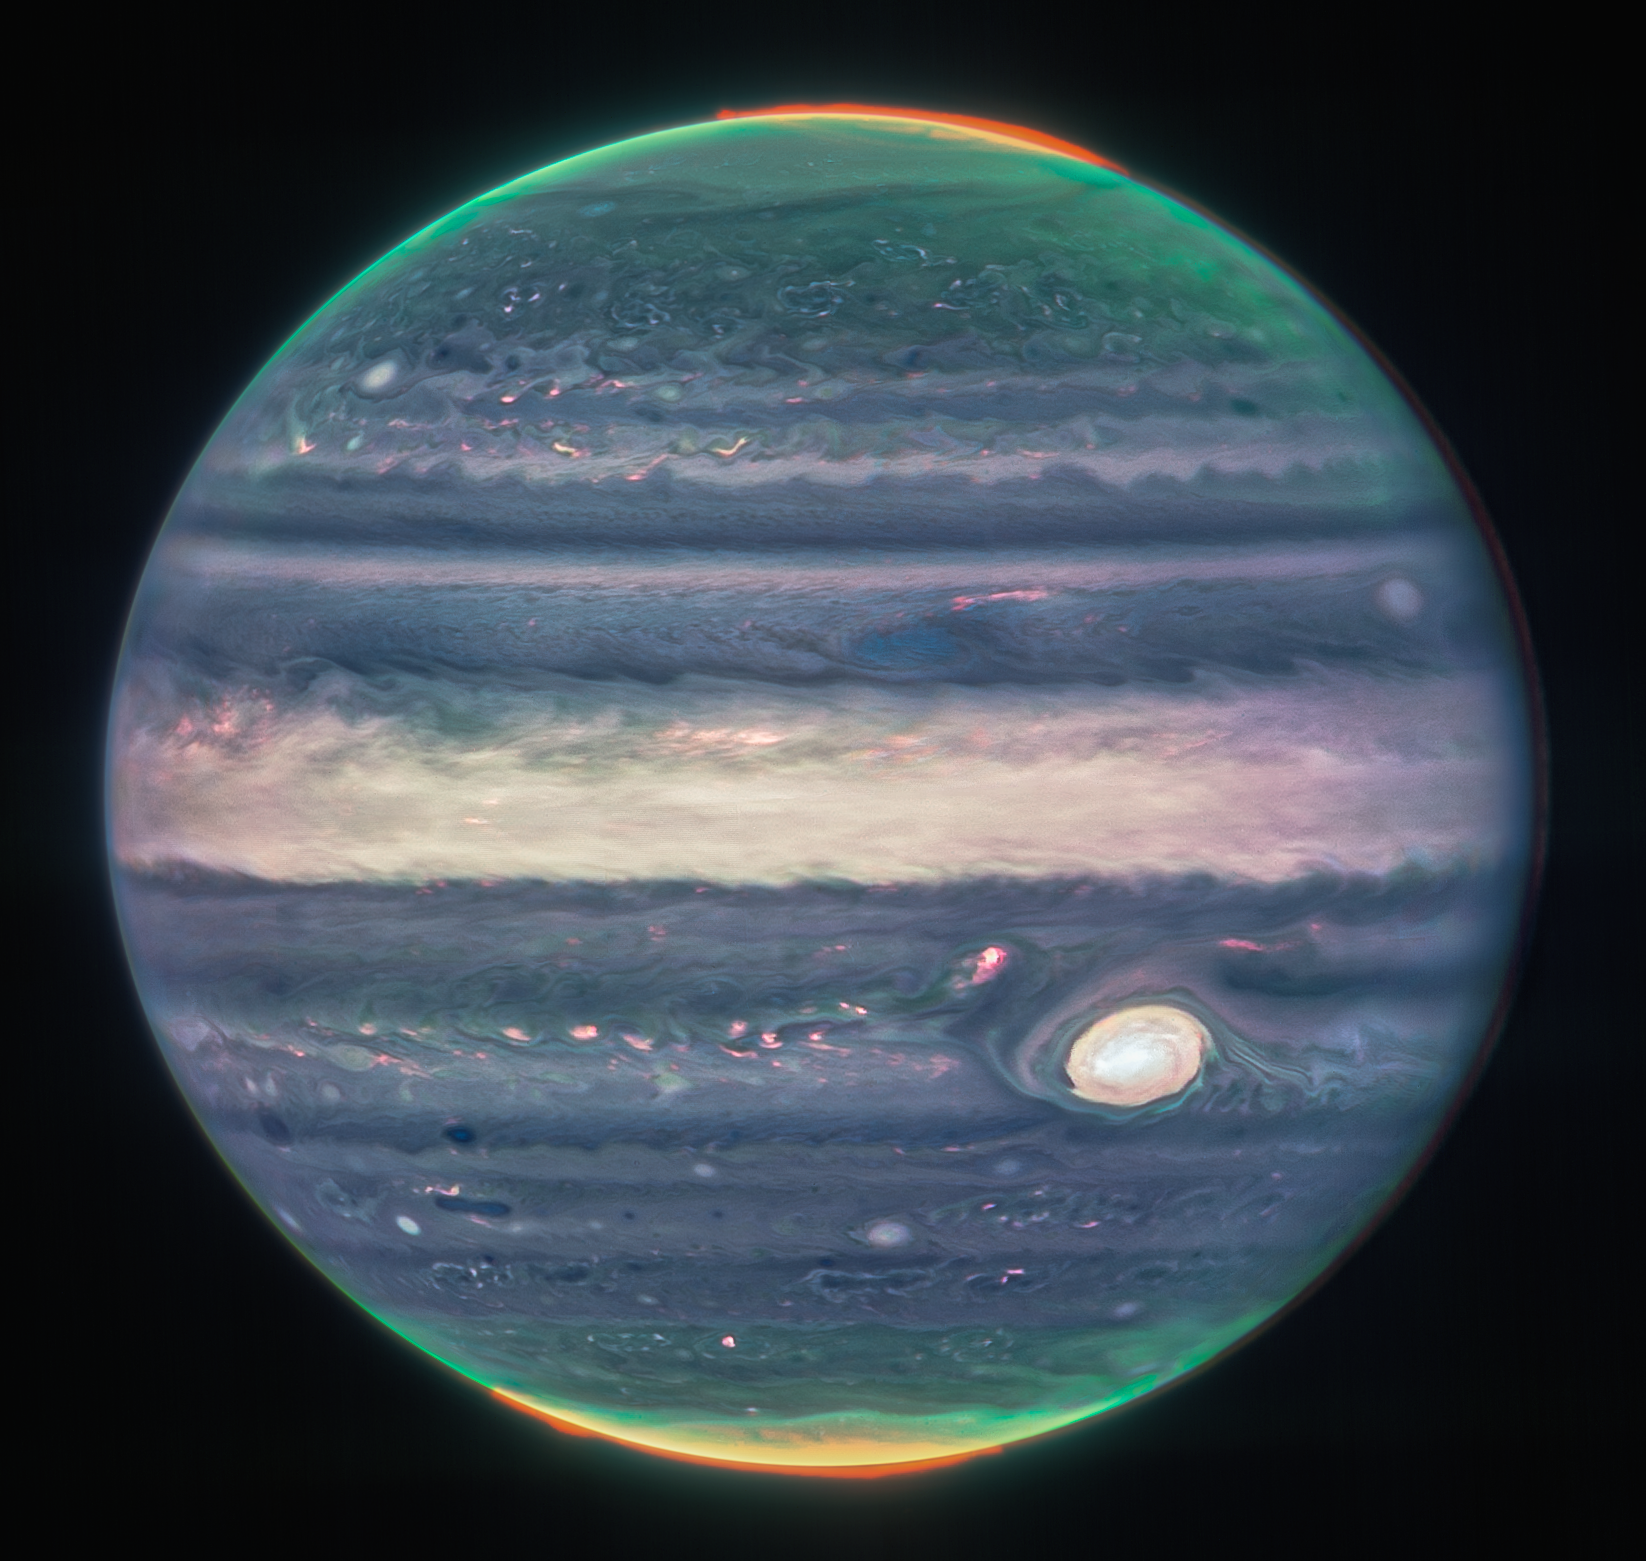 A stunning view of Jupiter by the James Webb Space Telescope. Image Credit: NASA, ESA, CSA, Jupiter ERS Team; image processing by Judy Schmidt.